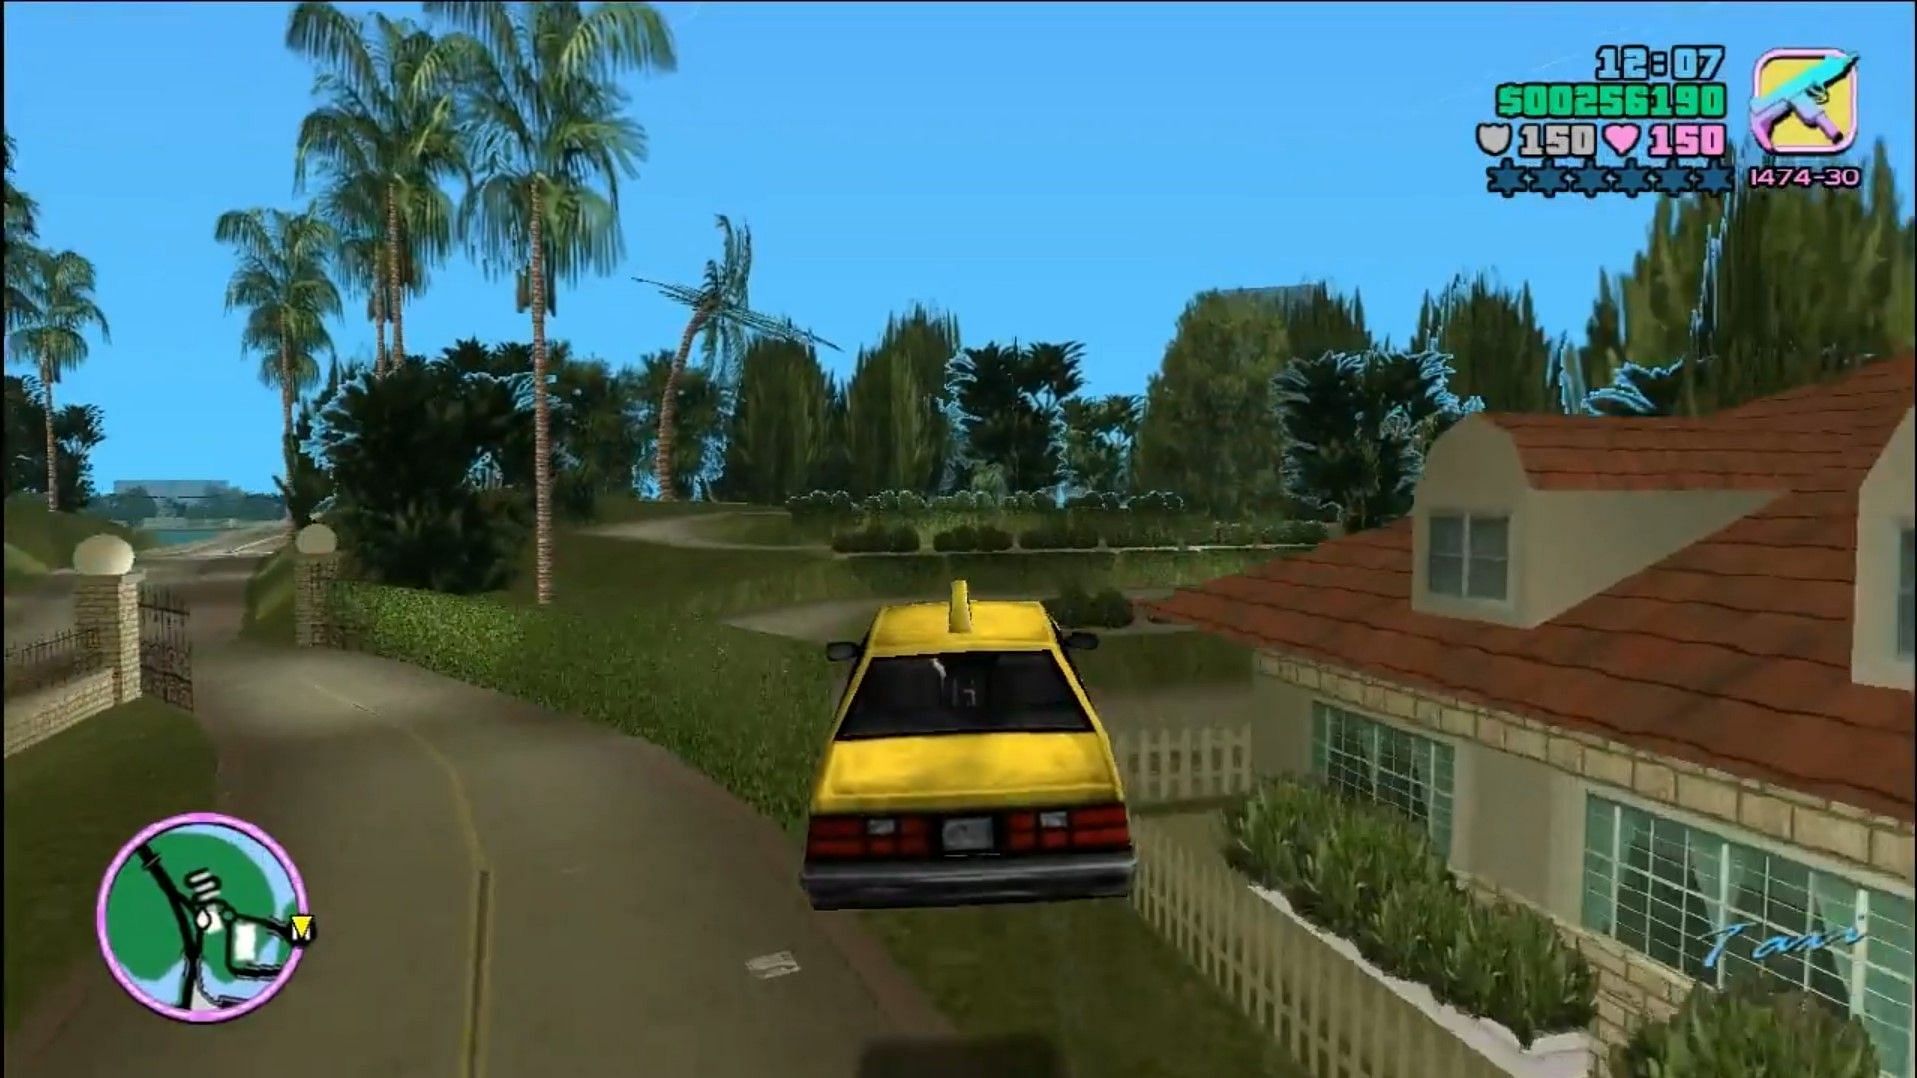 An example of a jumping taxi in GTA Vice City (Image via Rockstar Games)